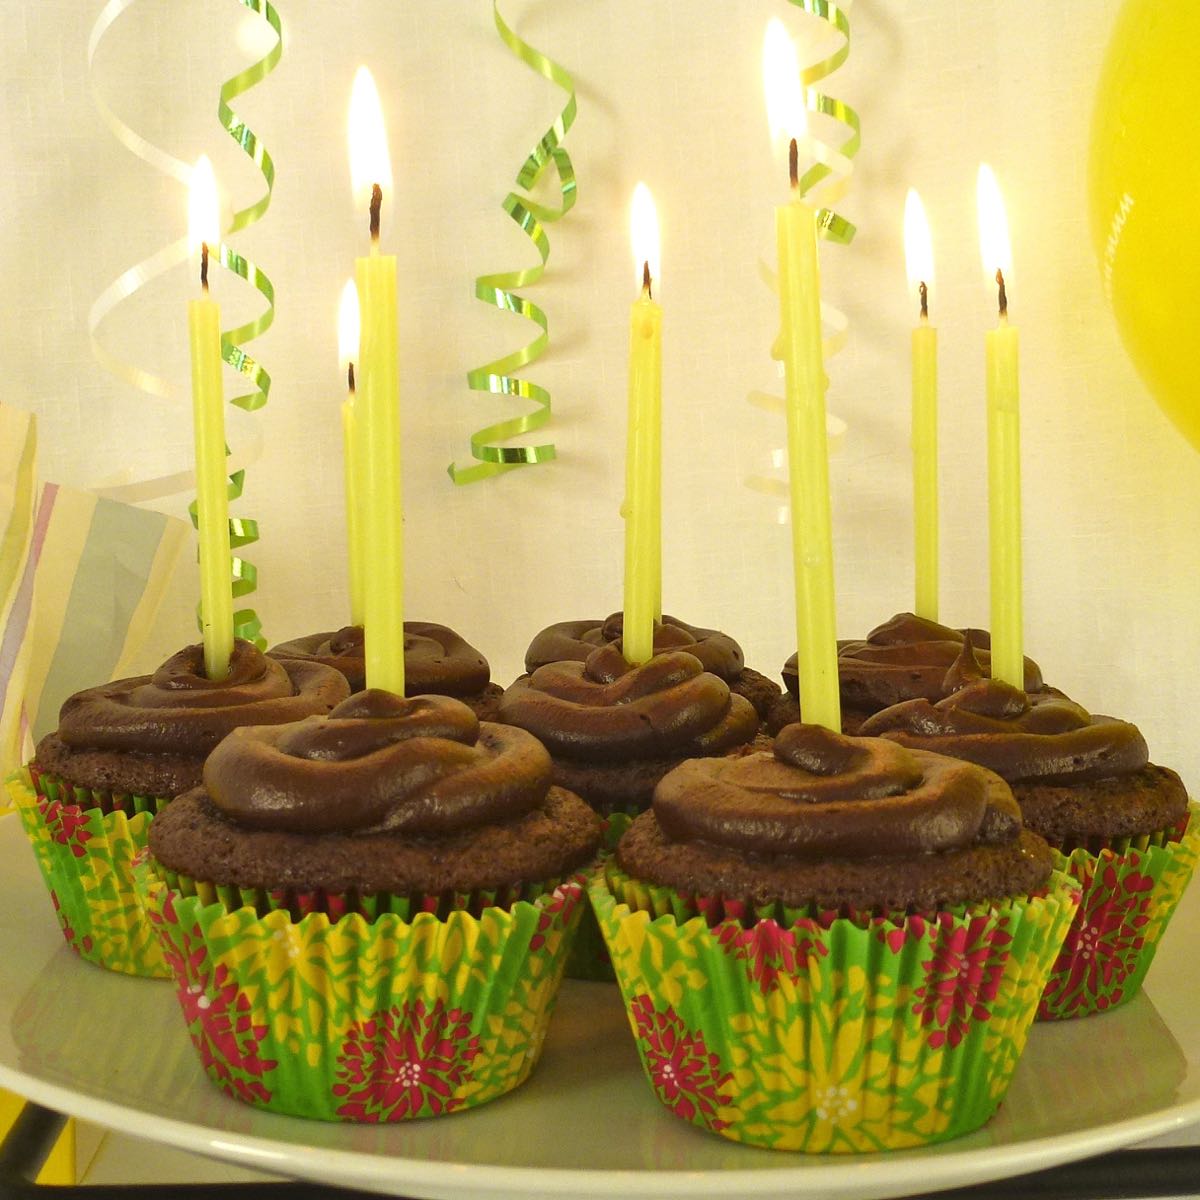 Gluten Free Chocolate Cupcakes with Chocolate Icing each with a birthday candle in it.